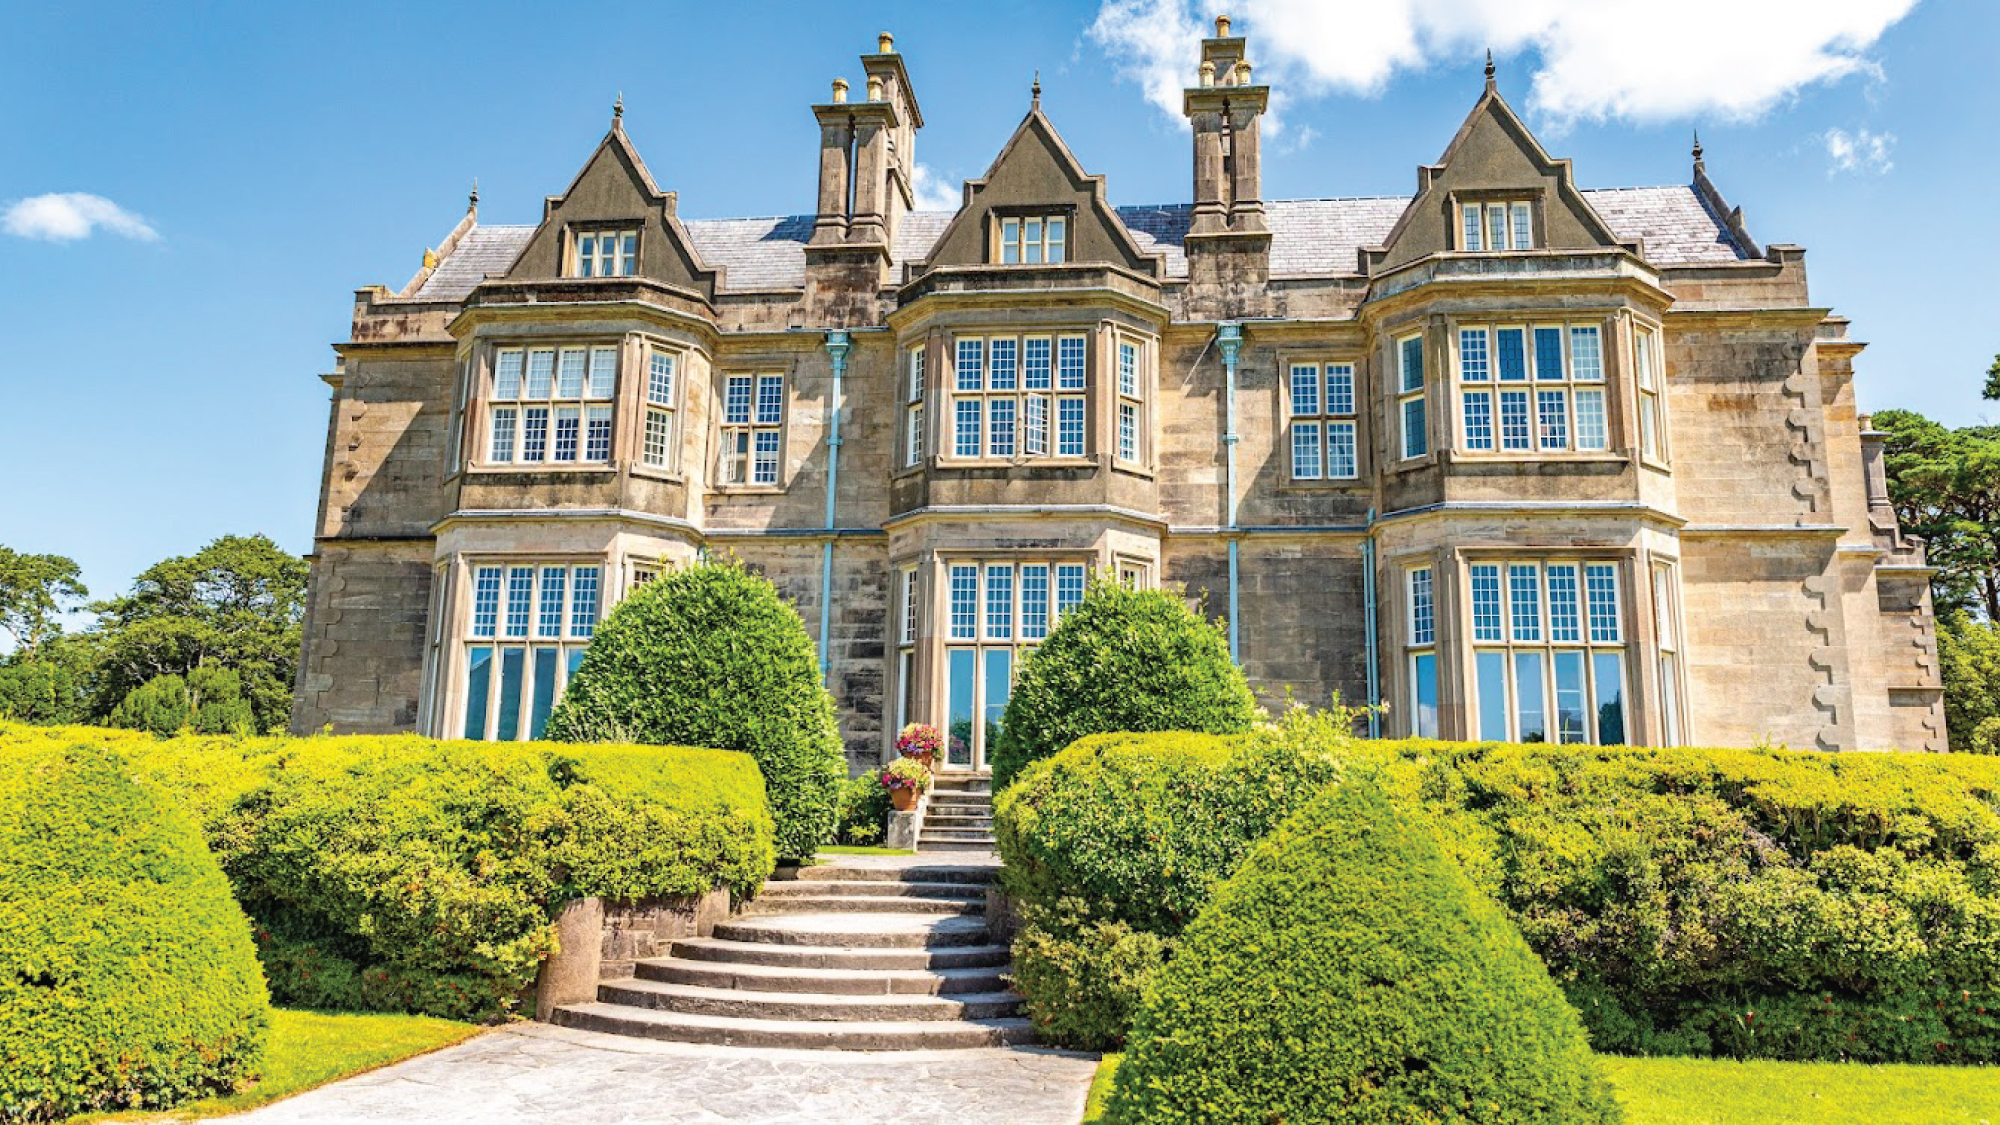 the historic Muckross House nestled in the lush landscapes of Kerry, Ireland, offering a glimpse into the country's storied past.